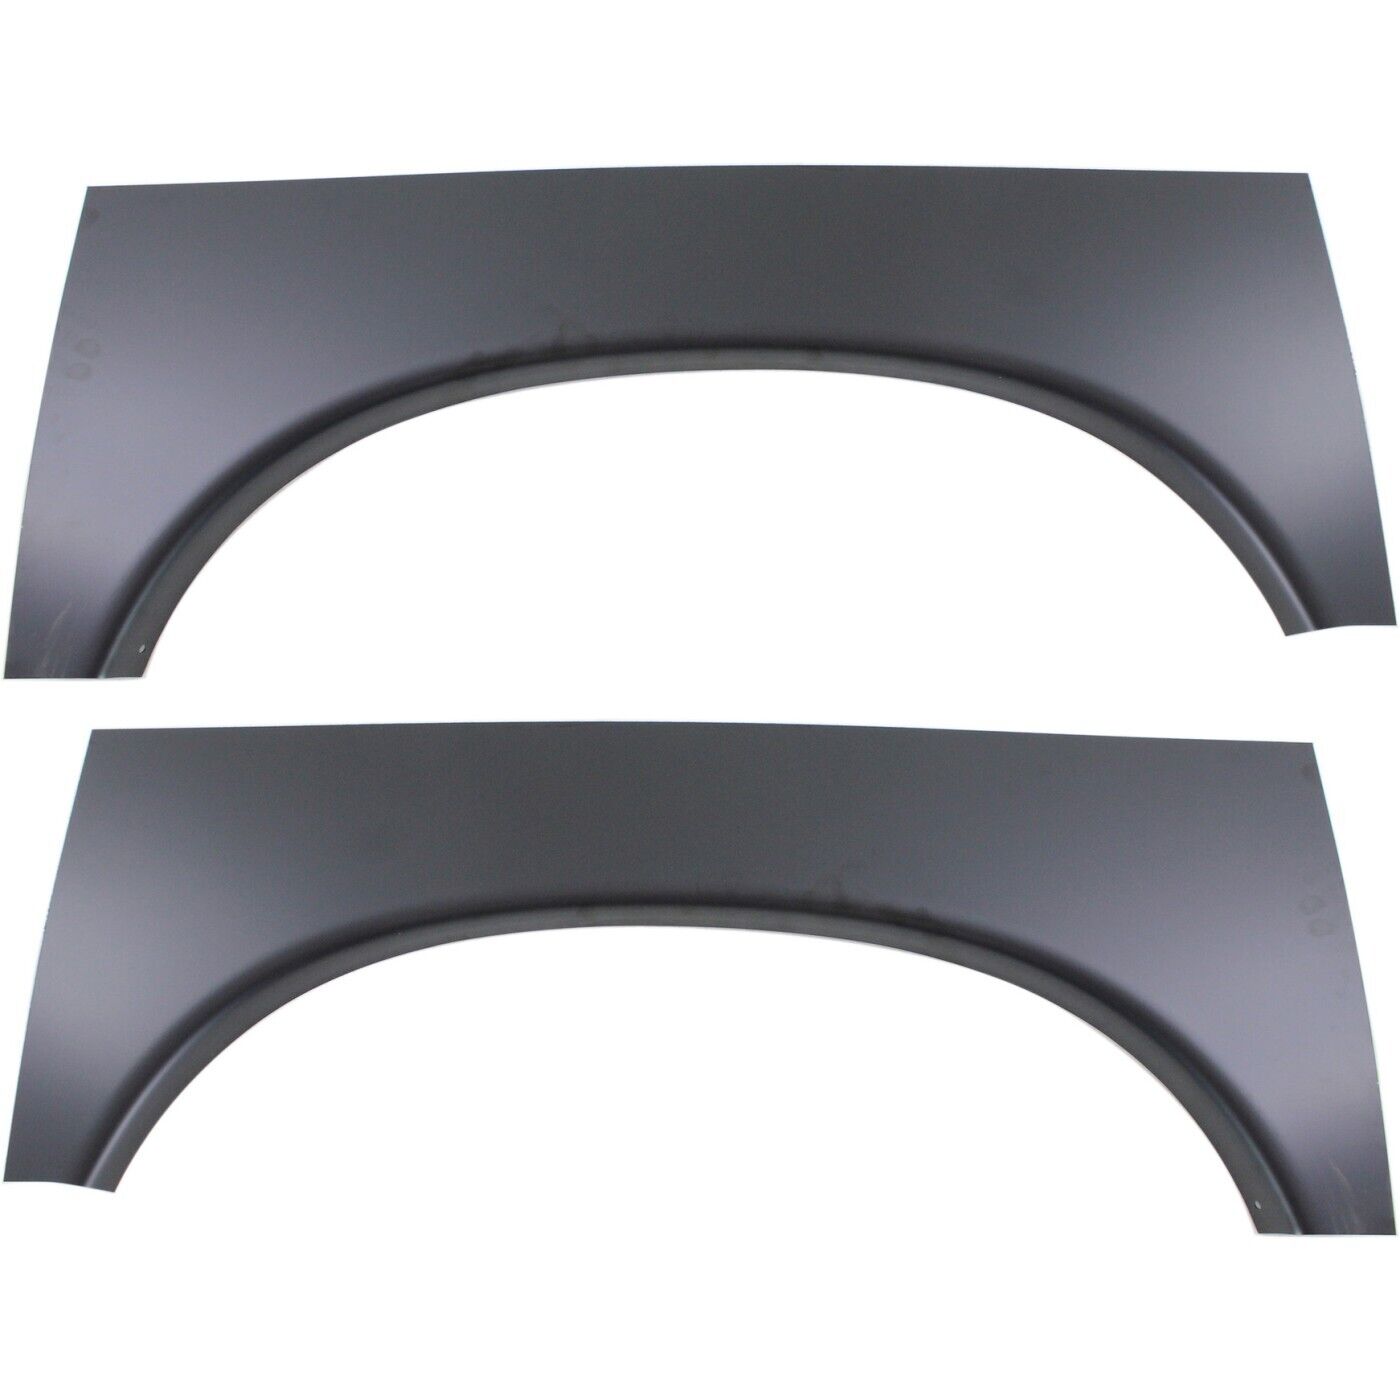 Wheel Arch Repair Panel For 2002-2009 Dodge Ram 1500 Set of 2 Rear LH and RH